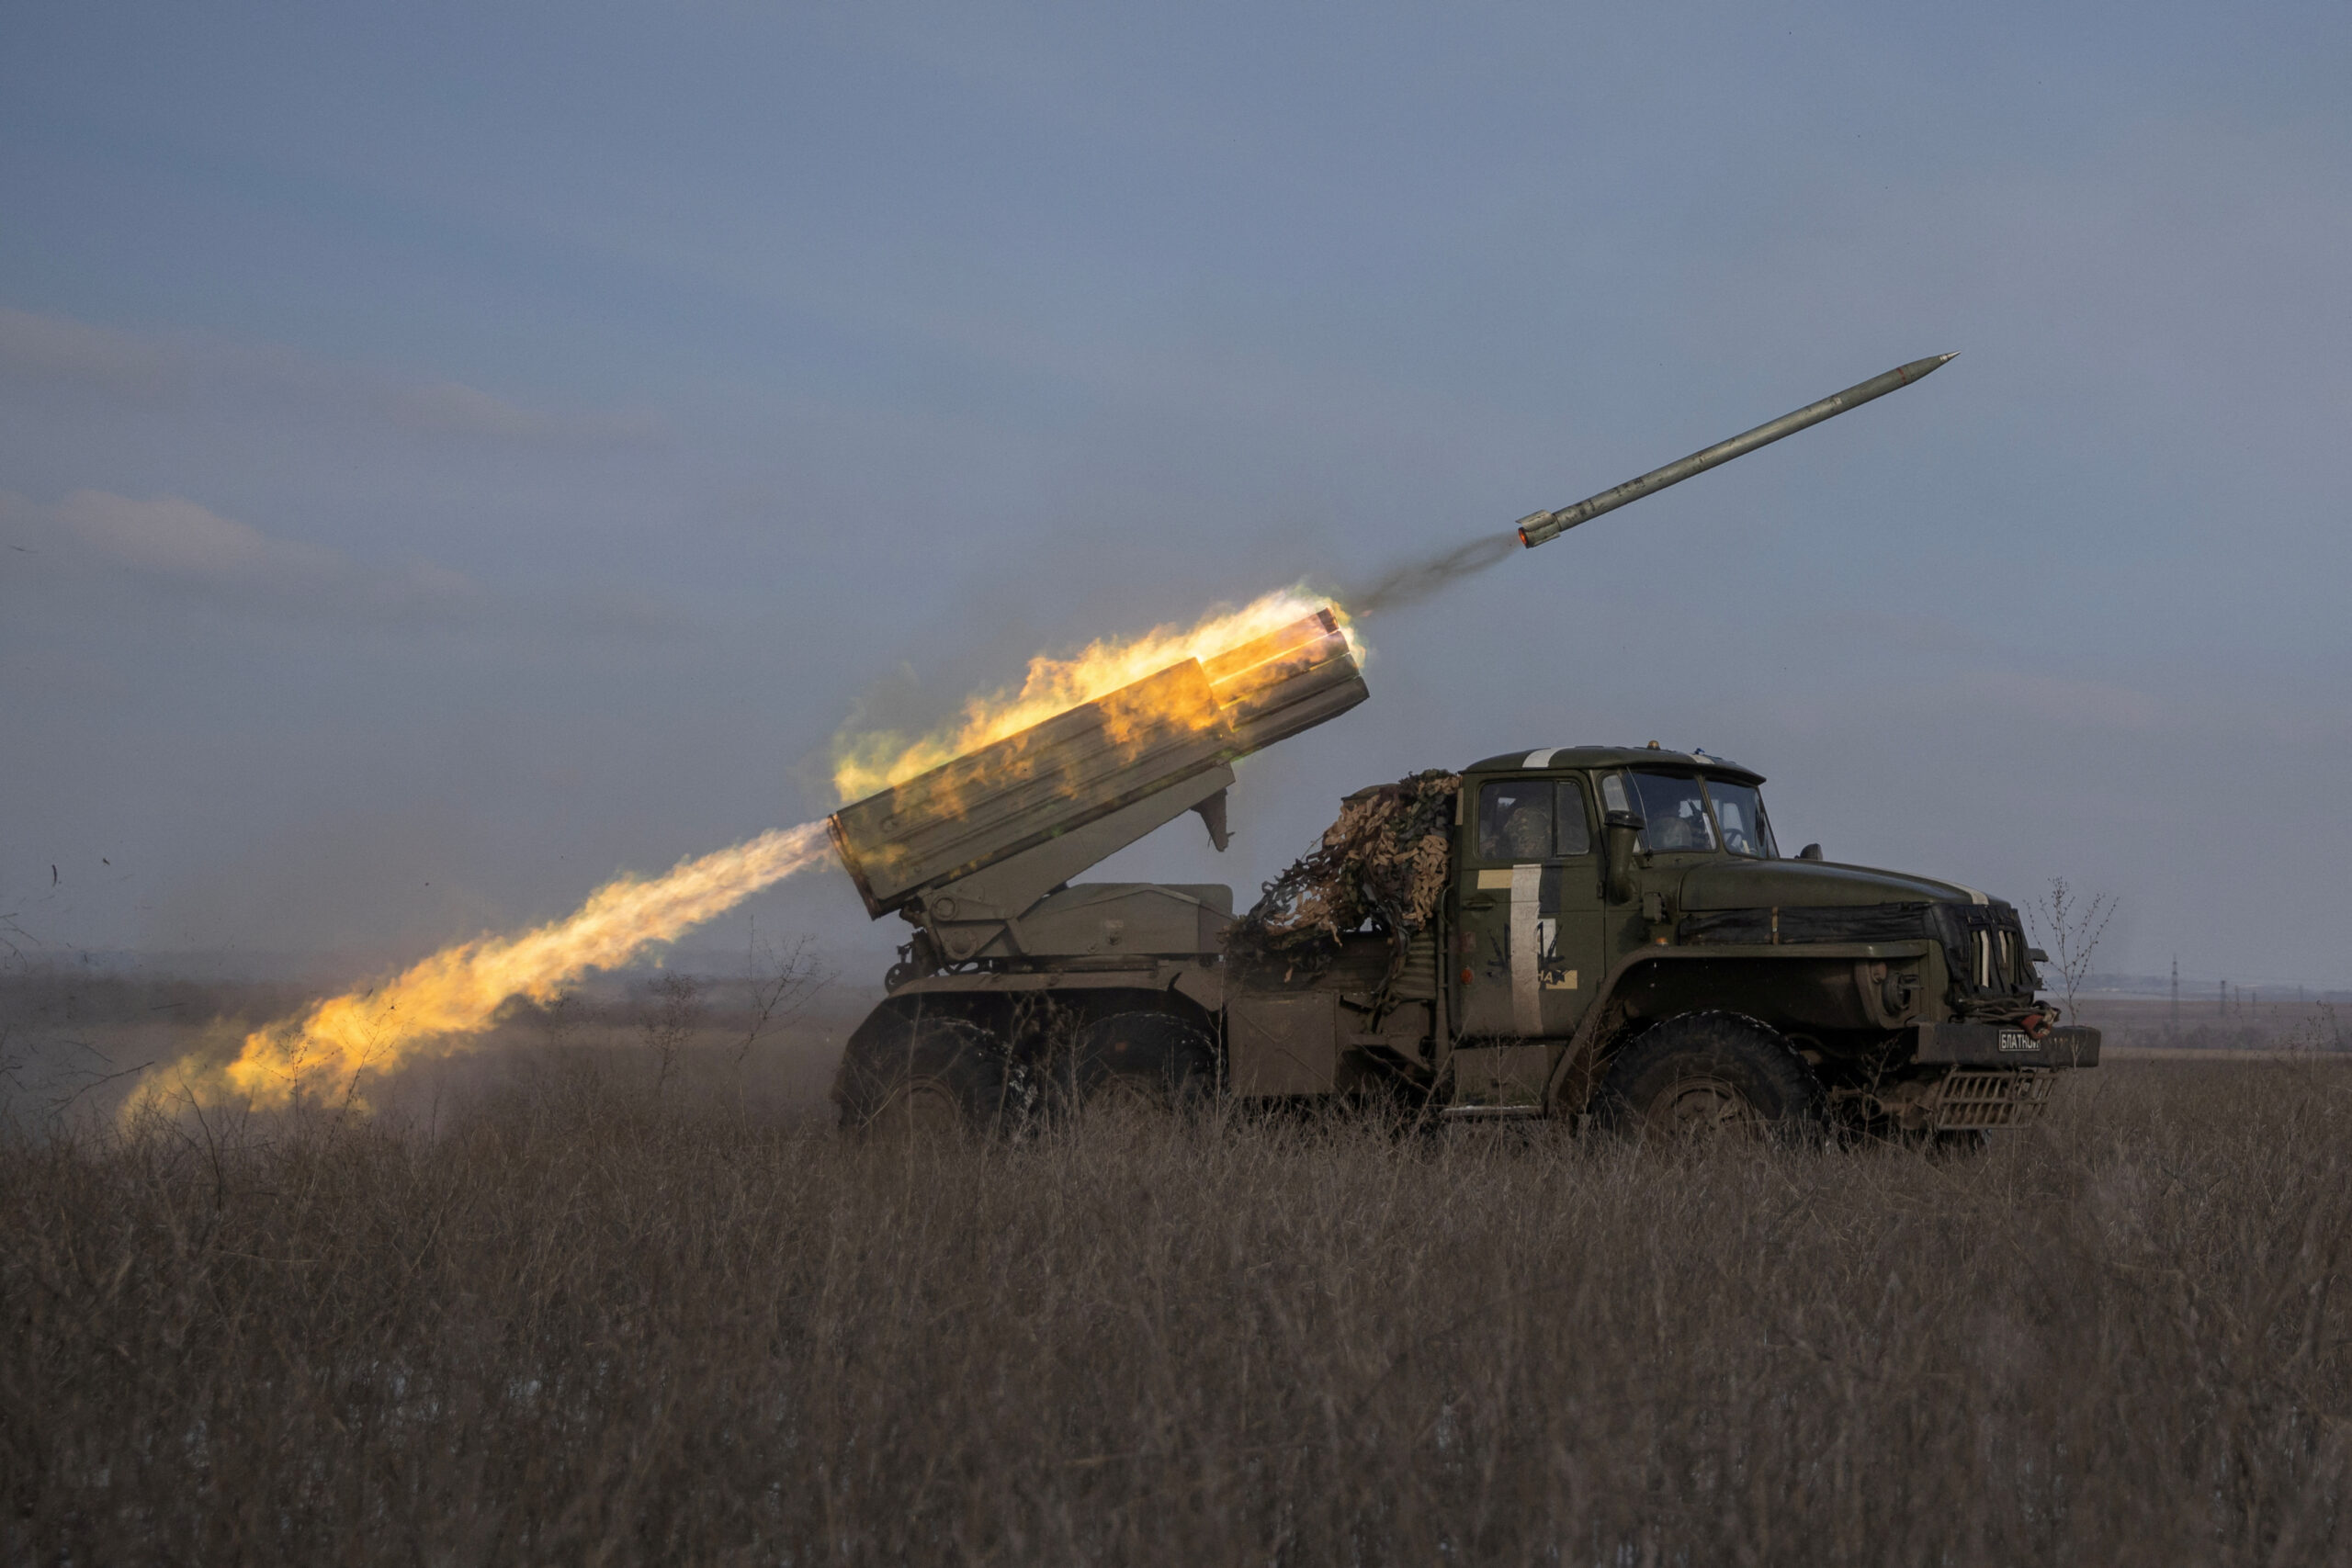 Ukrainian servicemen fire a BM-21 Grad multiple launch rocket system towards Russian positions on a frontline near the town of Marinka, amid Russia's attack on Ukraine, in Donetsk region, Ukraine, February 7, 2023. REUTERS/Marko Djurica TPX IMAGES OF THE DAY